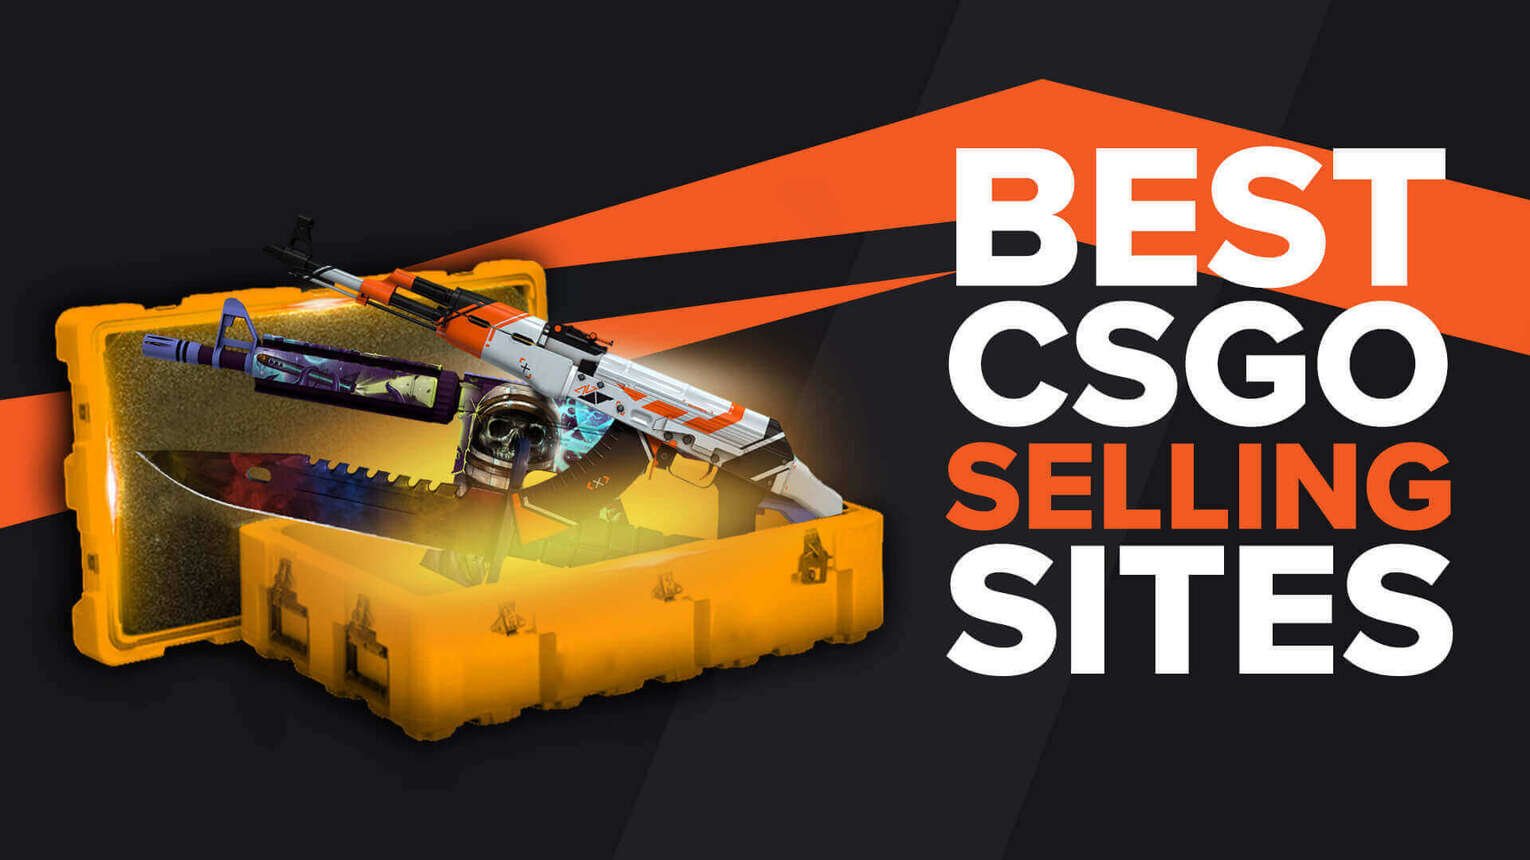 22 Very Simple Things You Can Do To Save Time With skins for sale in Counter-Strike 2